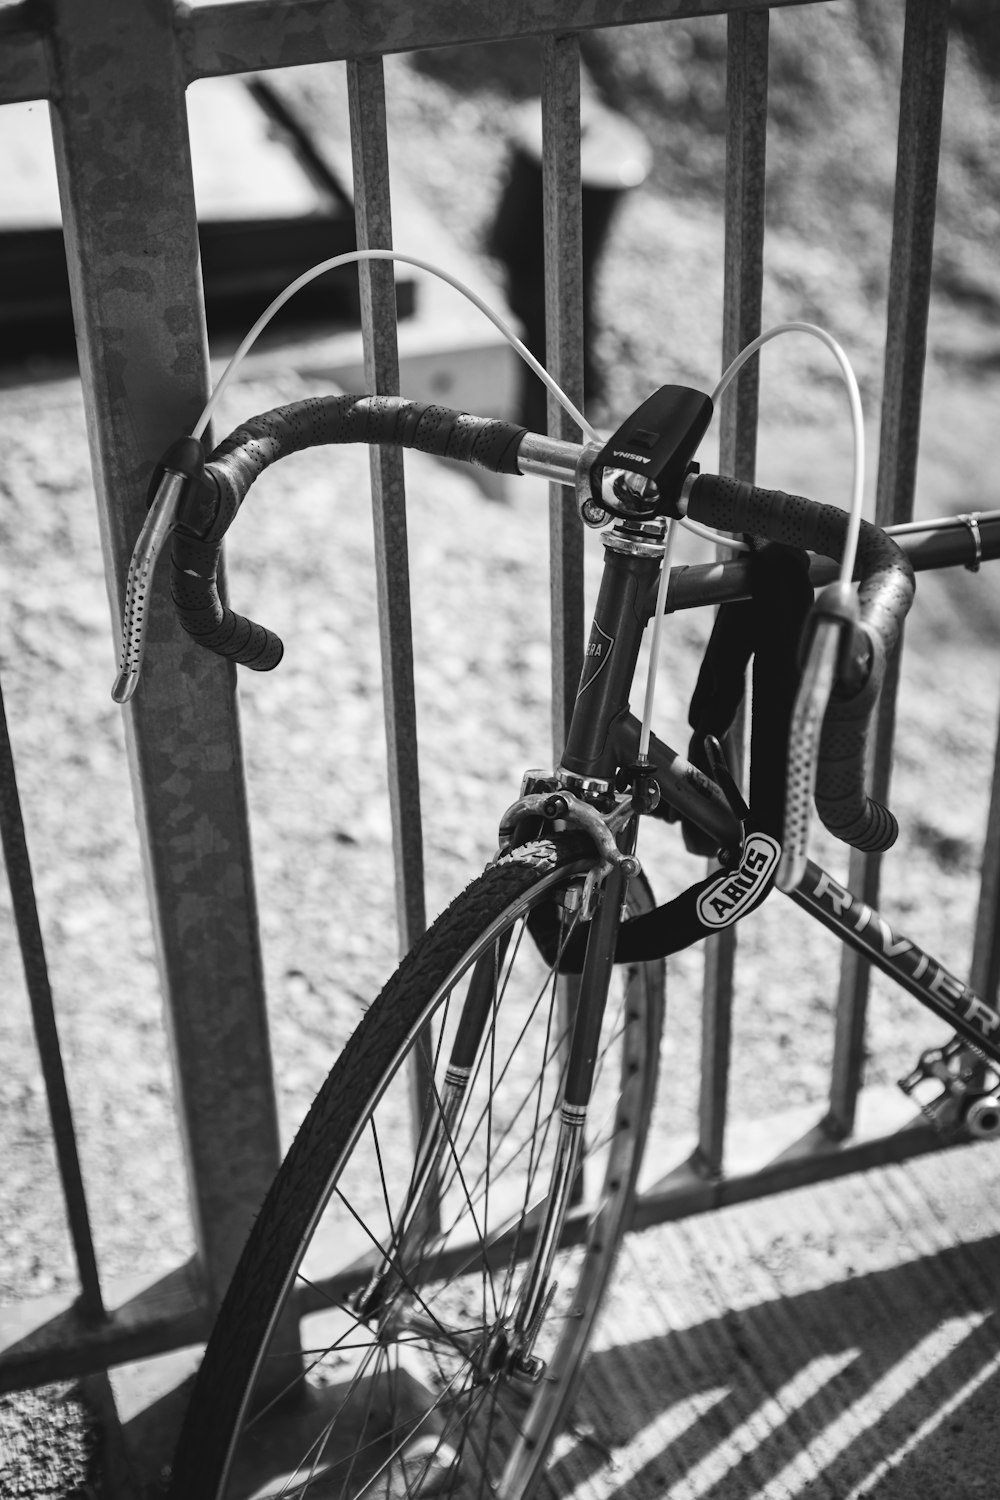 a bicycle locked to a metal fence